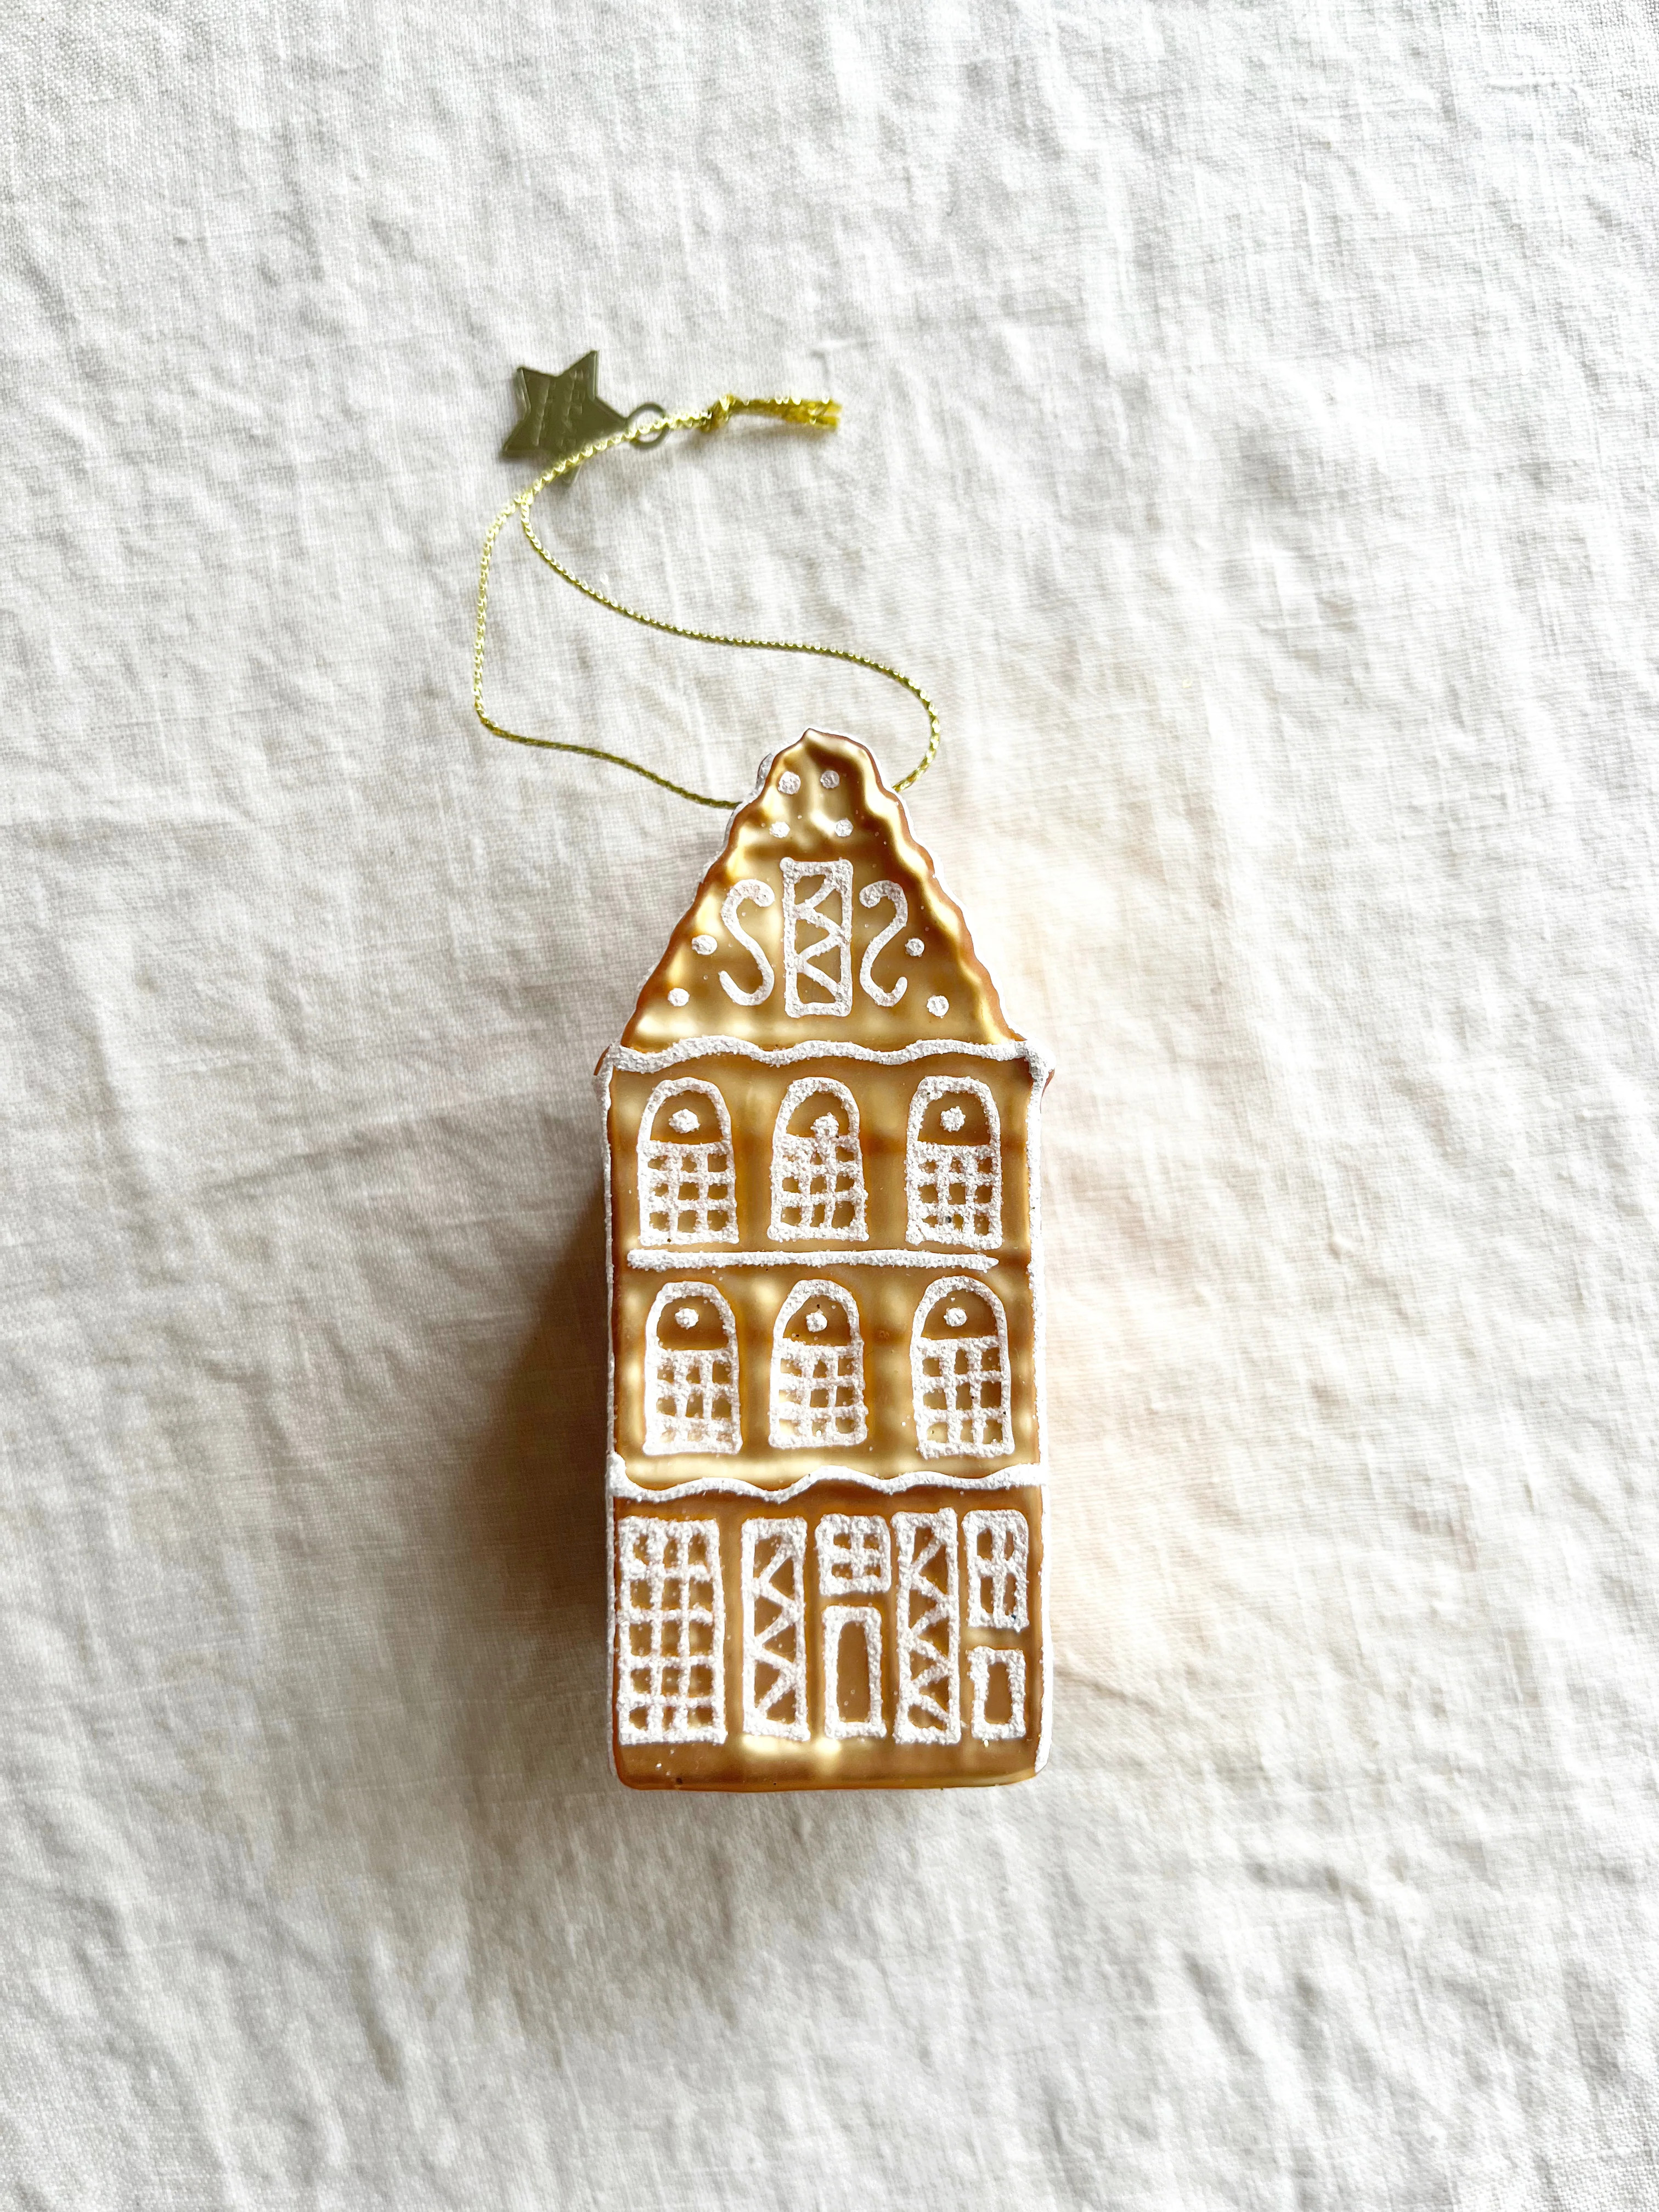 Gingerbread Canal House Ornament | the ARK elements